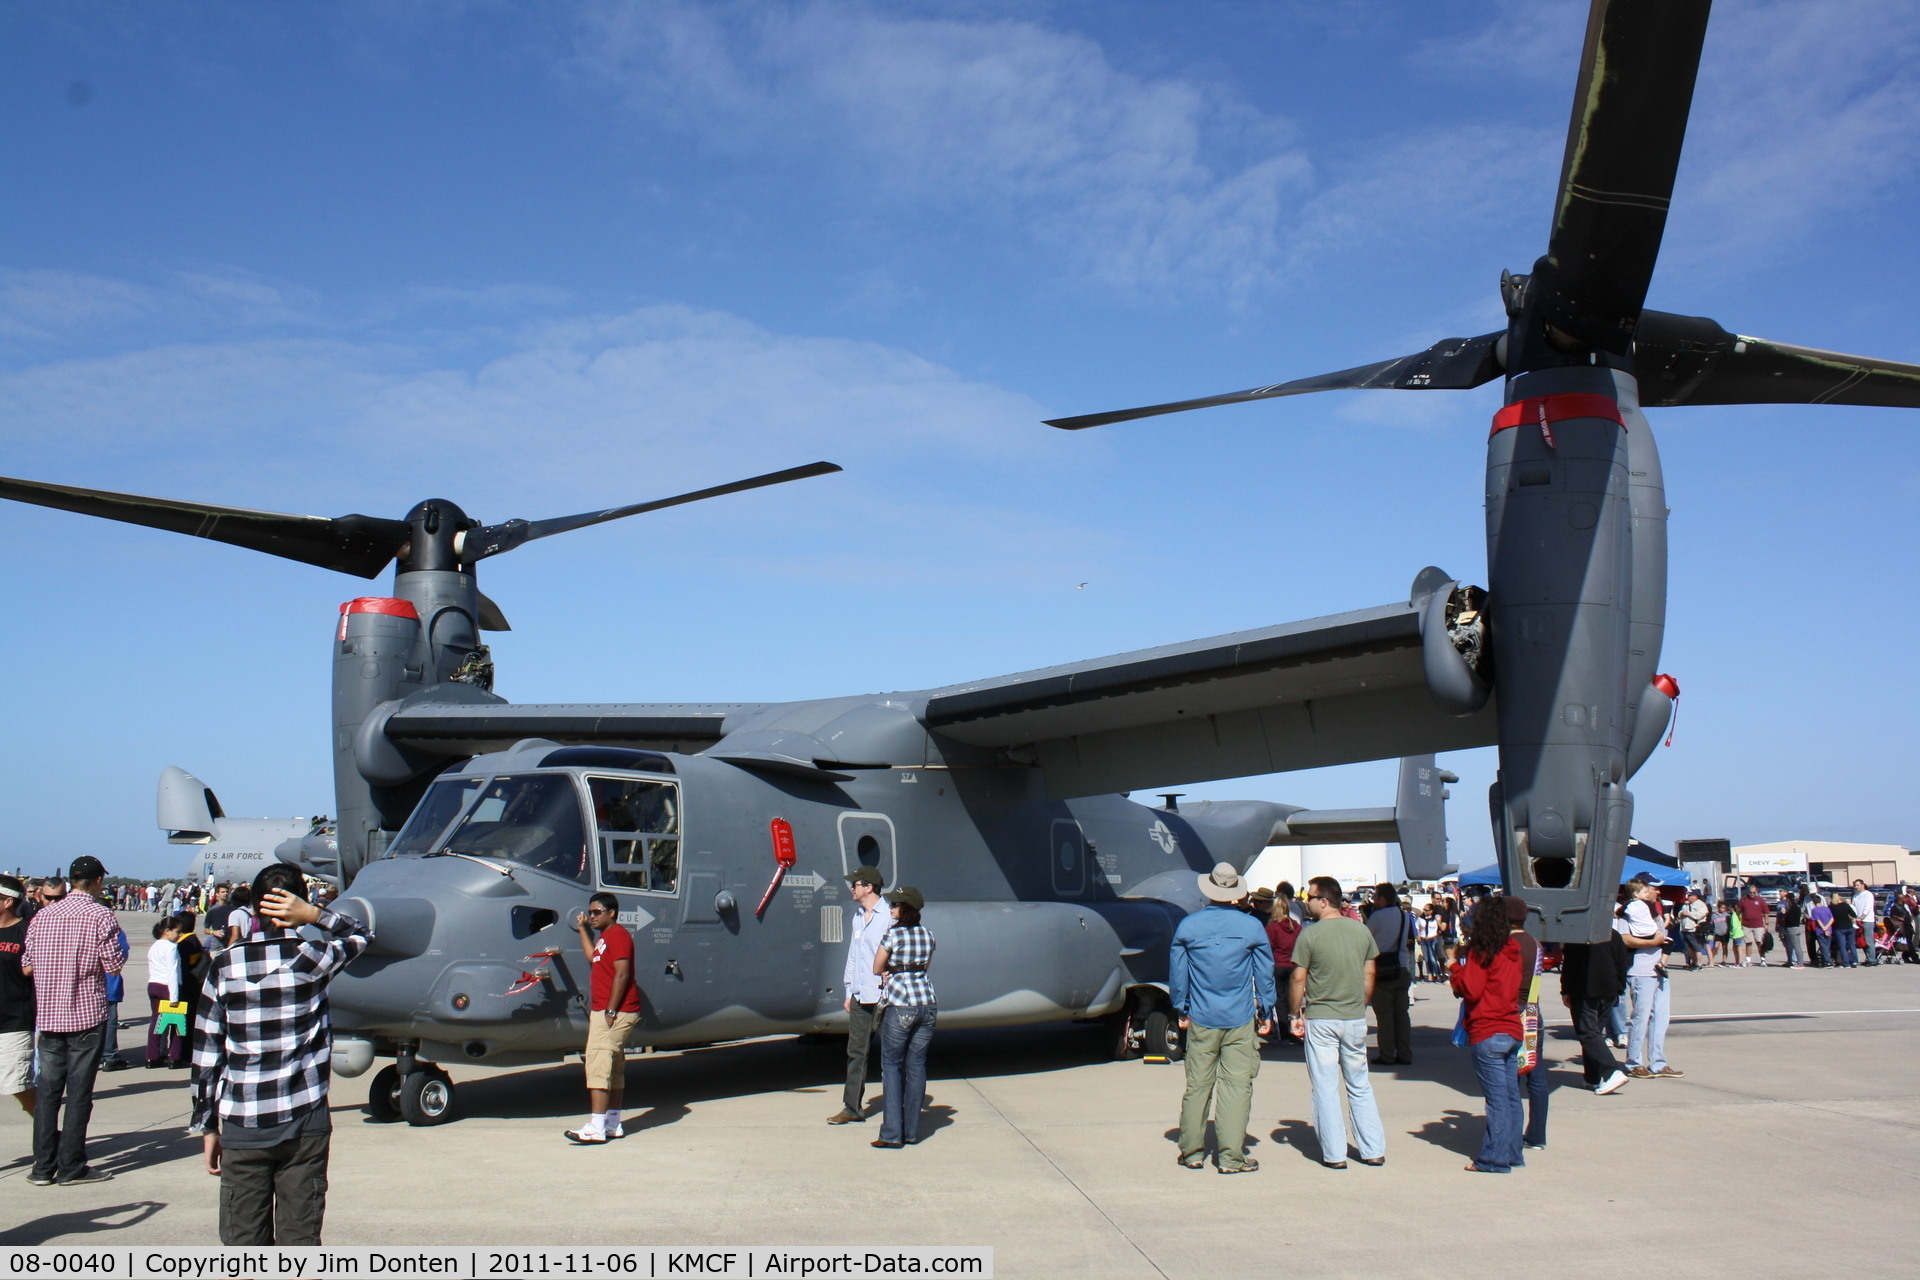 08-0040, 2010 Bell-Boeing CV-22B Osprey C/N D1021, CV-22 Osprey (08-0040) from the 1st Special Operations Wing at Hulbert Field on display at MacDill Air Fest